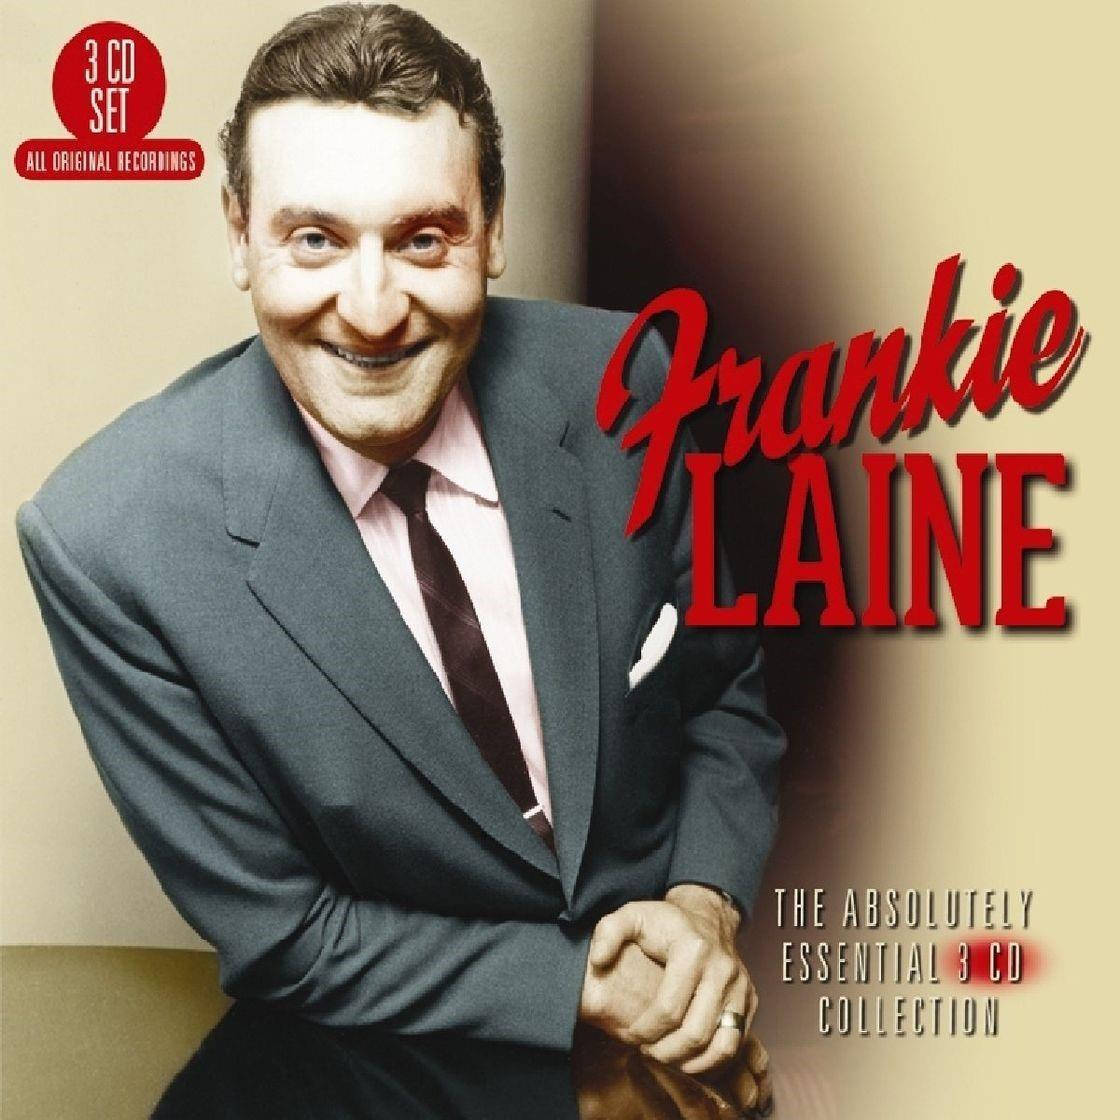 Frankie Laine The Absolutely Essential 3 Co Collection Wallpaper